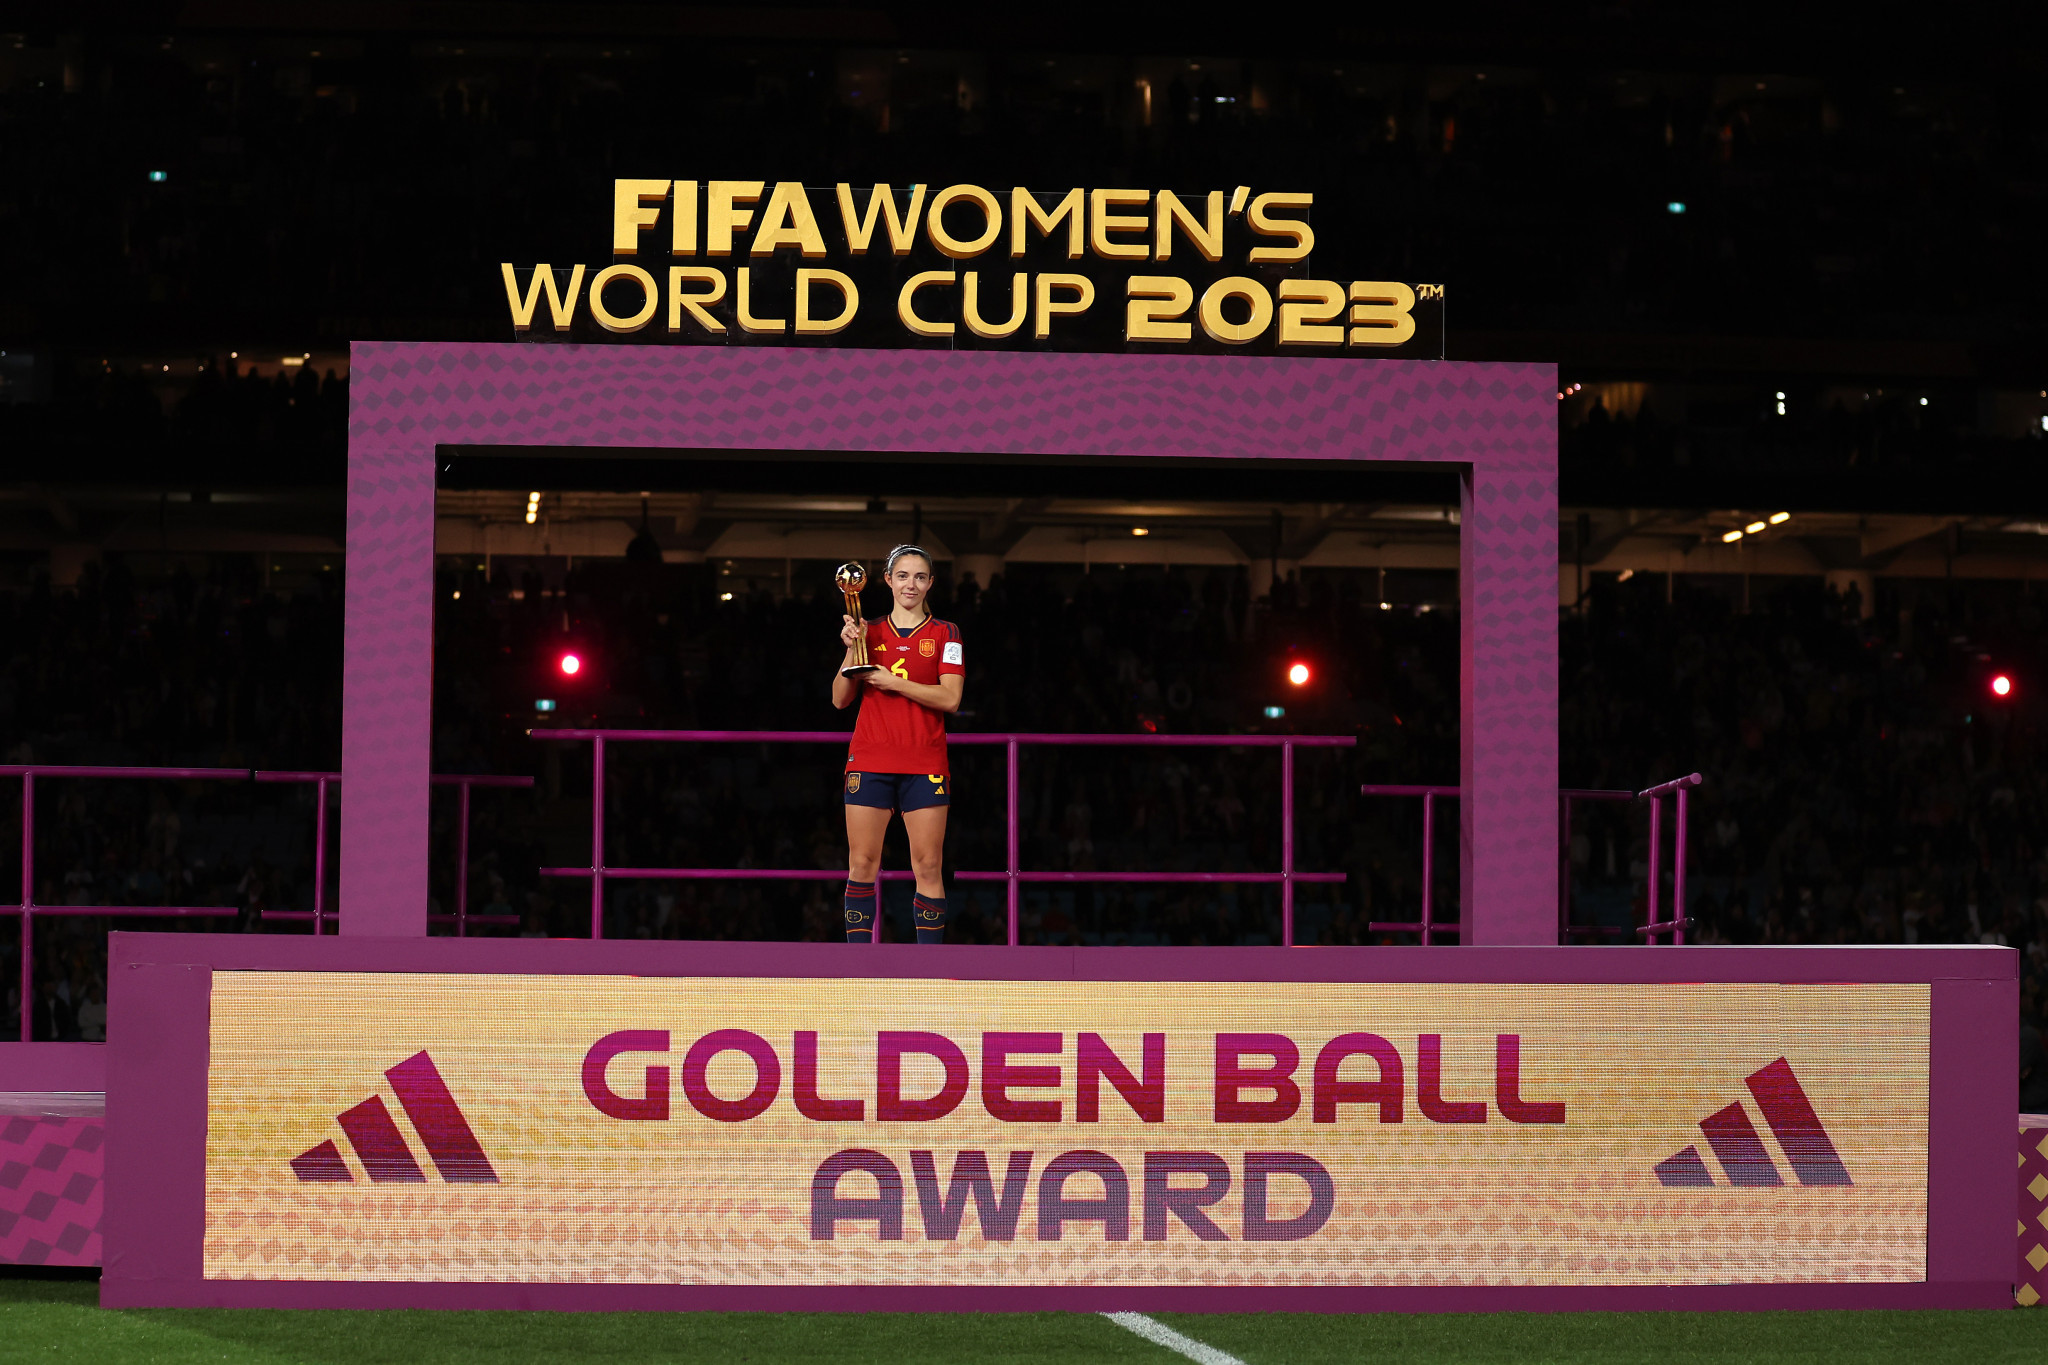 Spain's Aitana Bonmati won the Golden Ball award for her performances throughout the tournament ©Getty Images